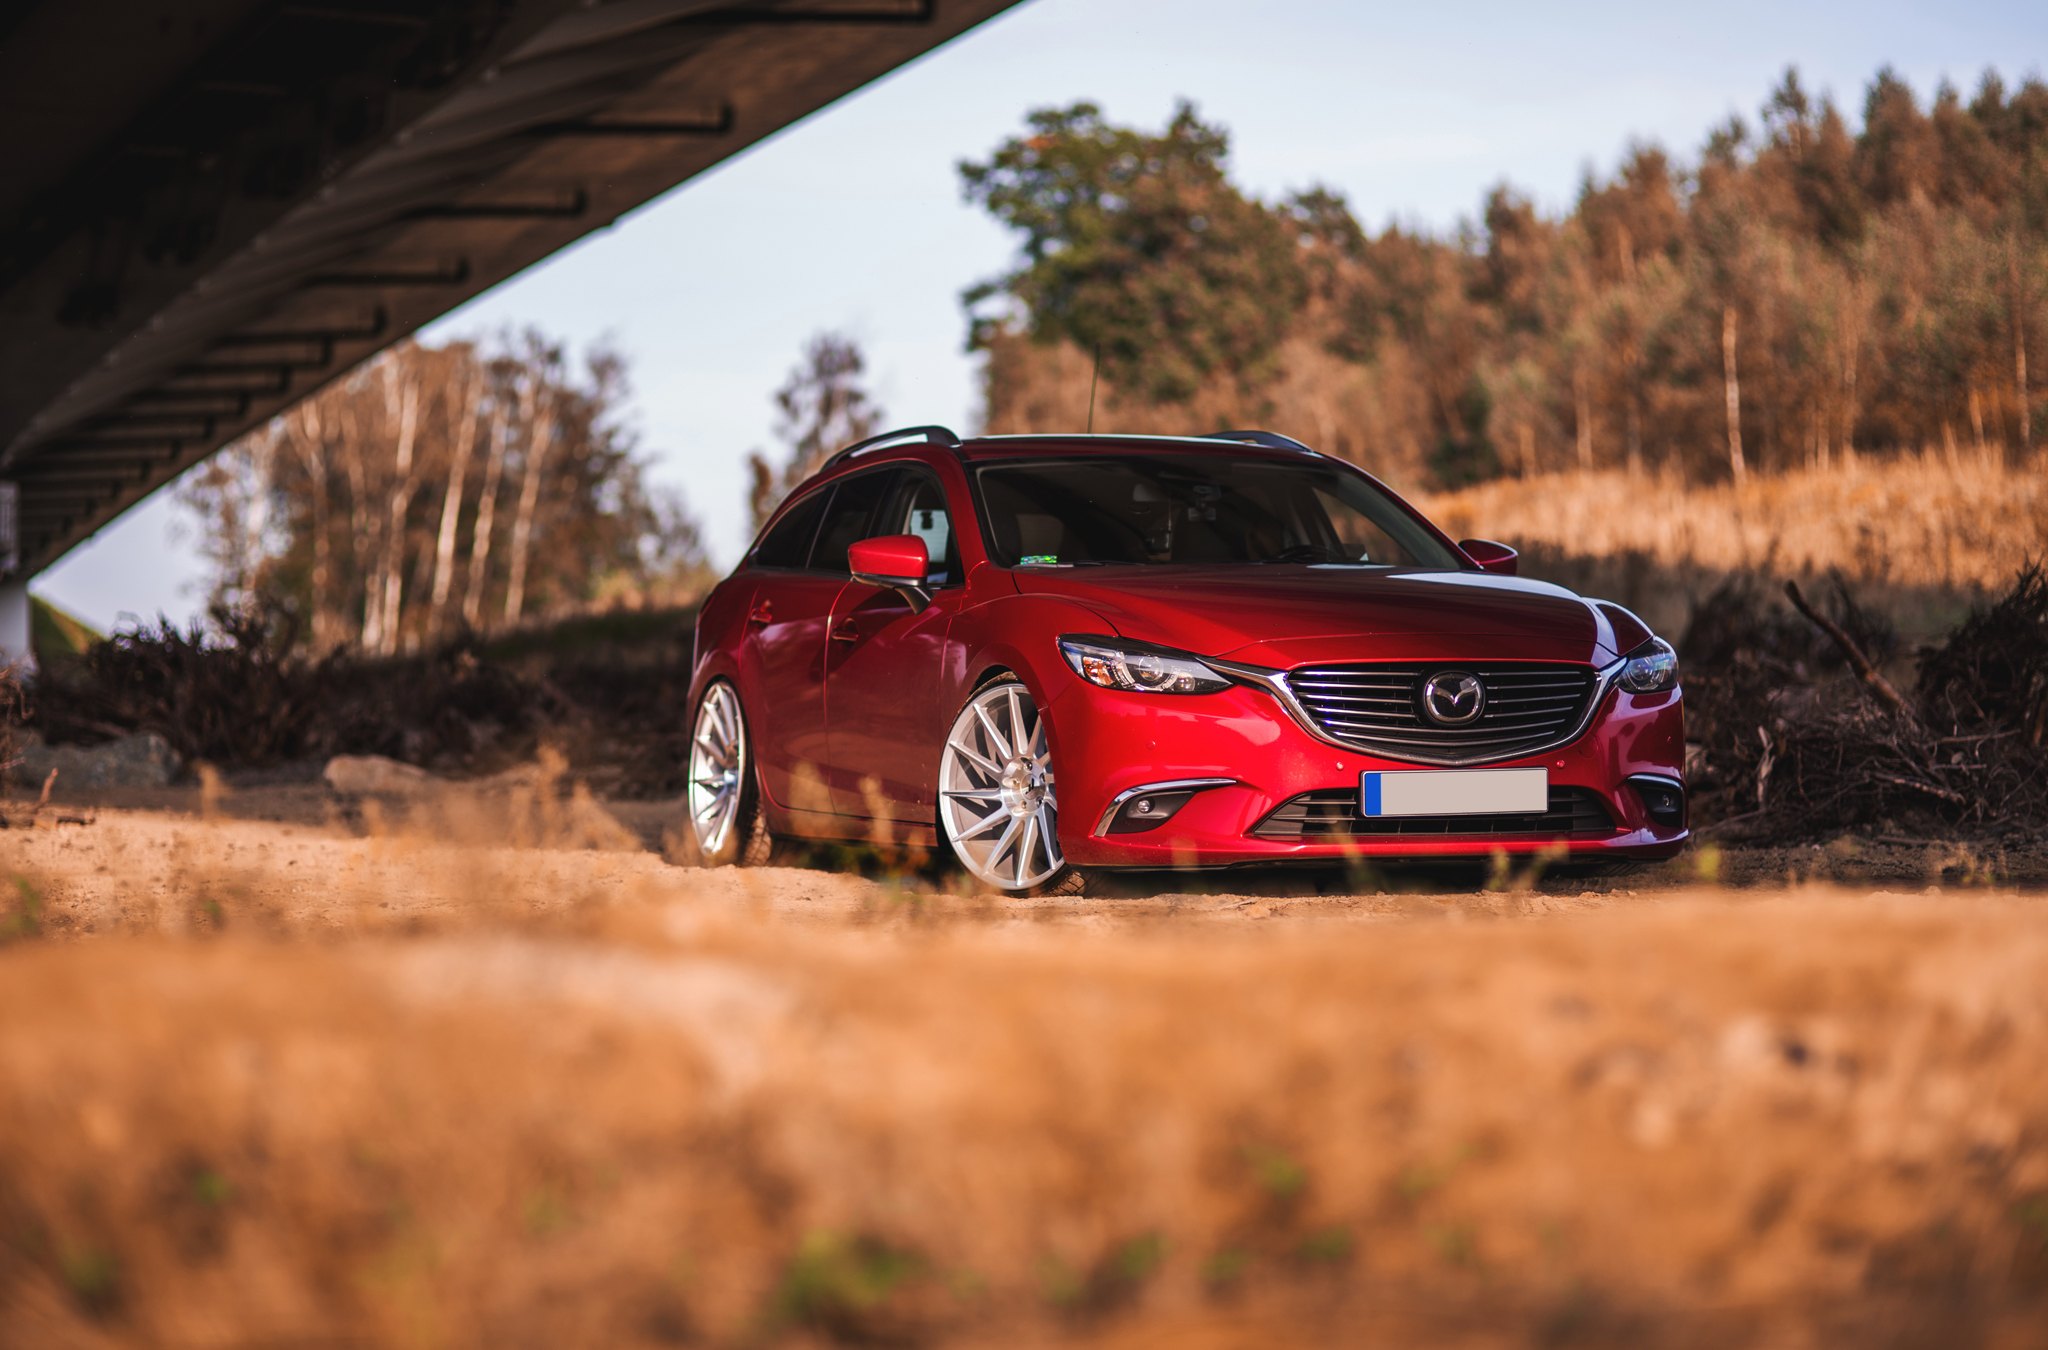 Chrome Billet Grille on Red Mazda 6 - Photo by JR Wheels